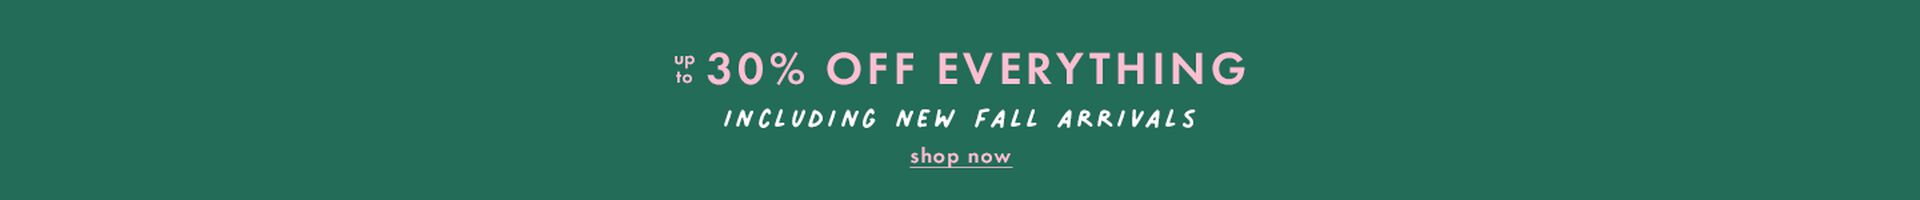 Up to 30% off Everything. shop now.